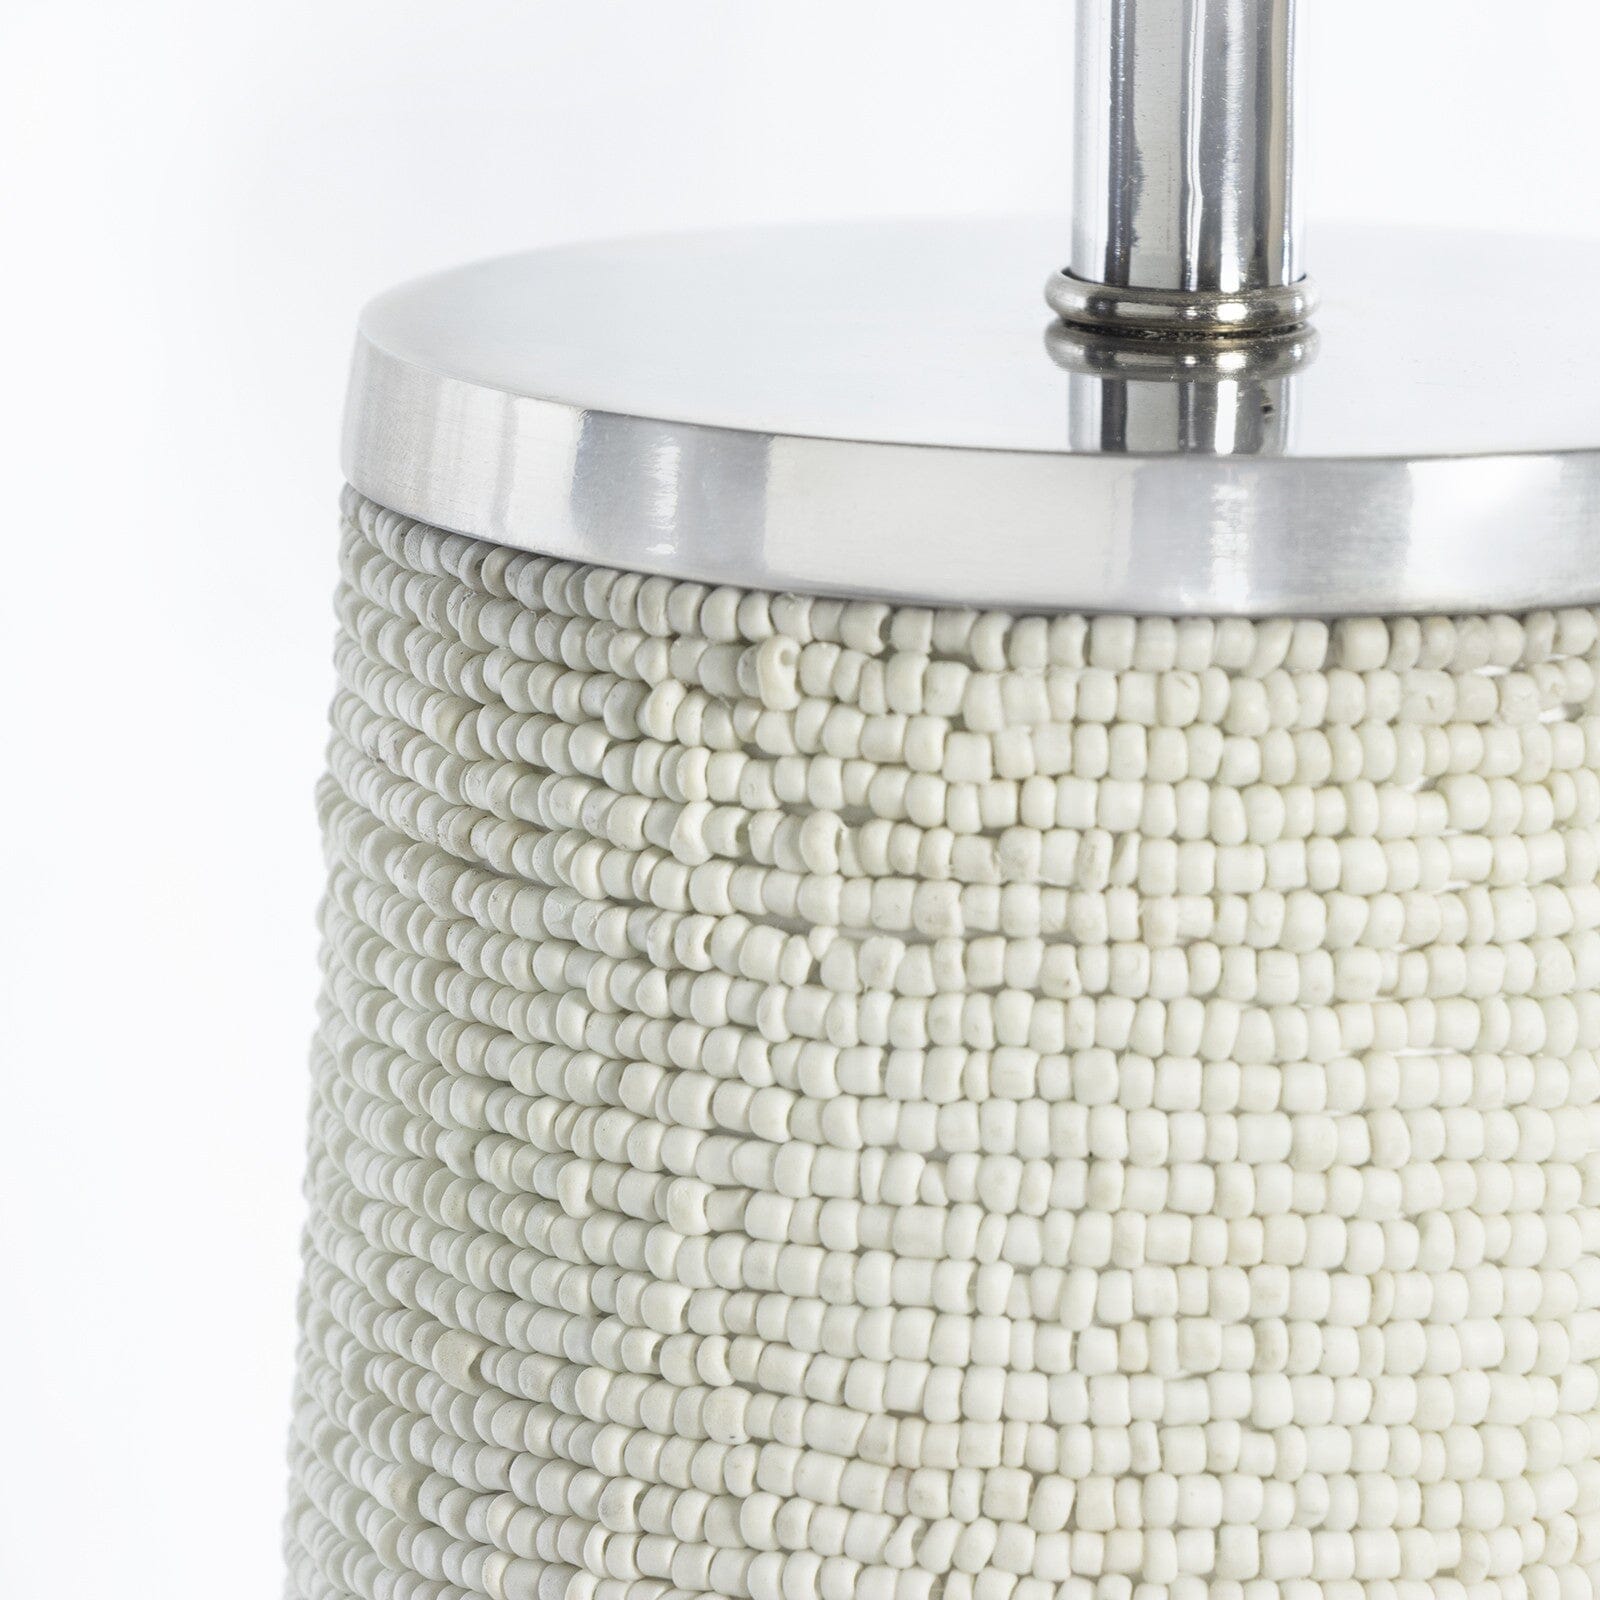 Lizza Table Lamp Table Lamps 